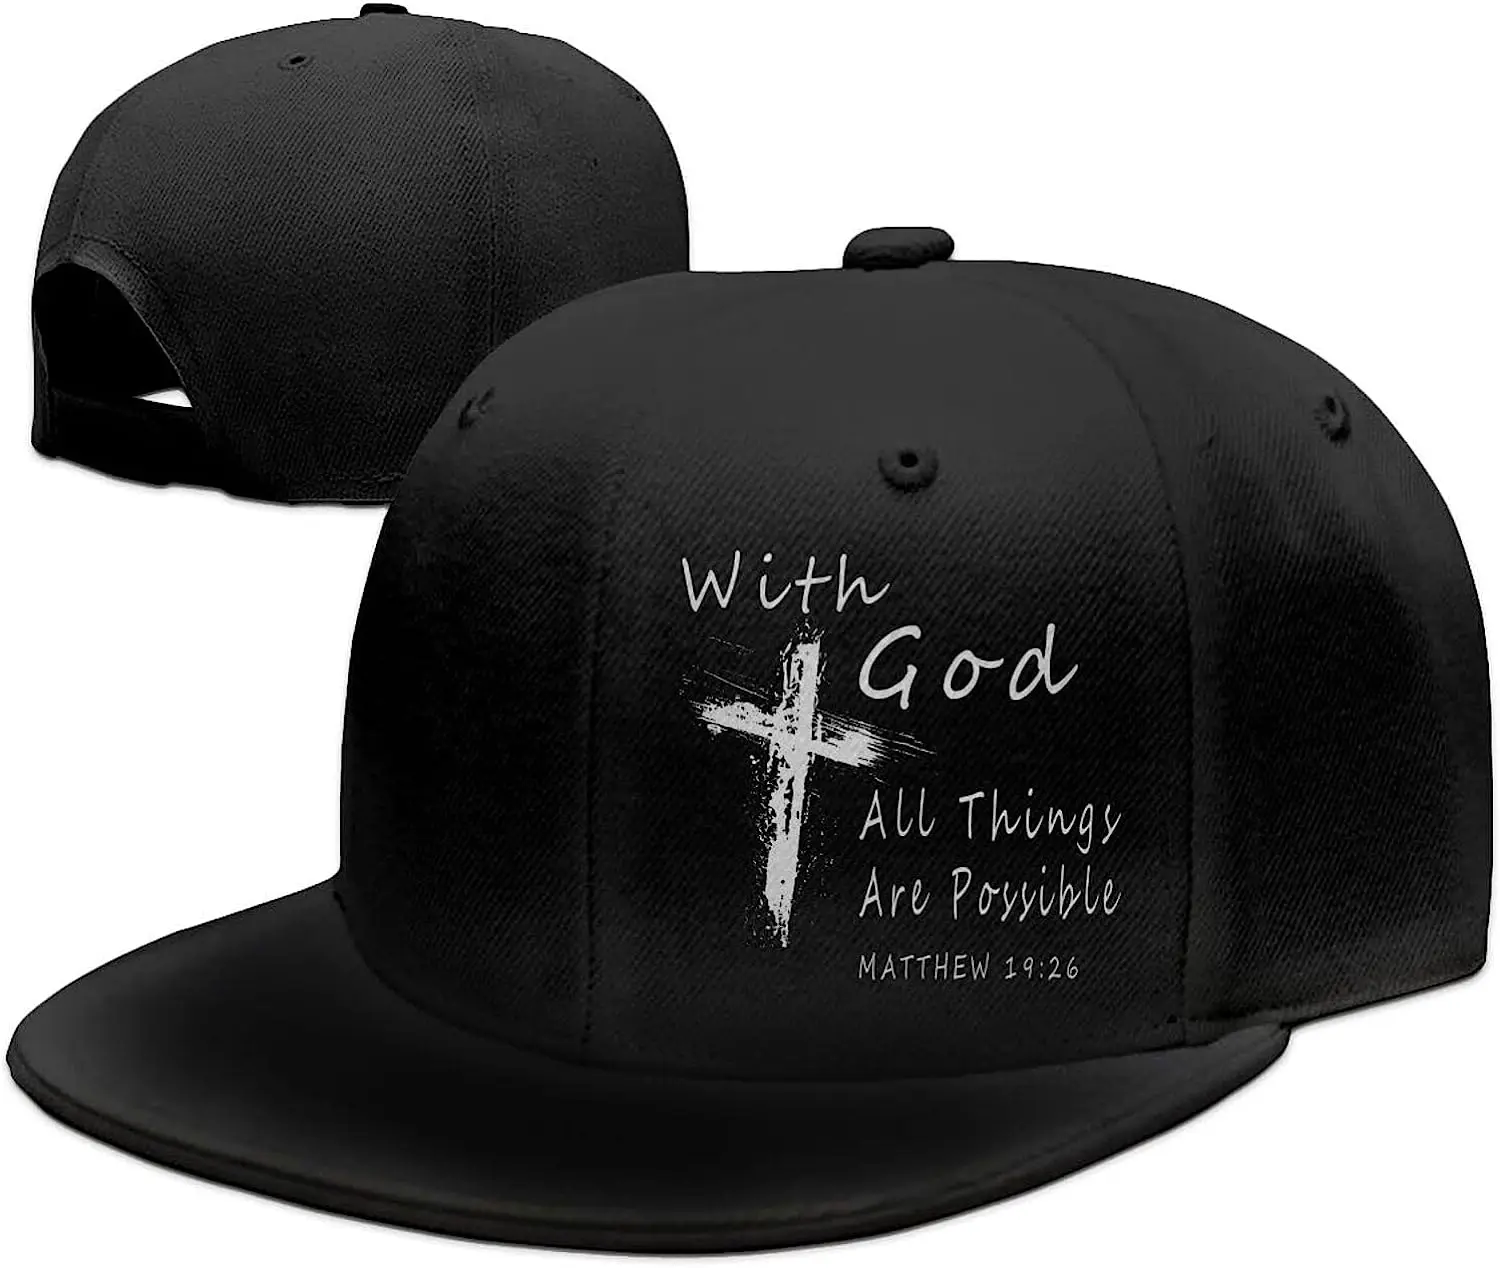 

Funny With God All Things are Possible Christian Faith Snapback Hats For Men Baseball Cap Adjustable Flat Bill Trucker Dad Gift